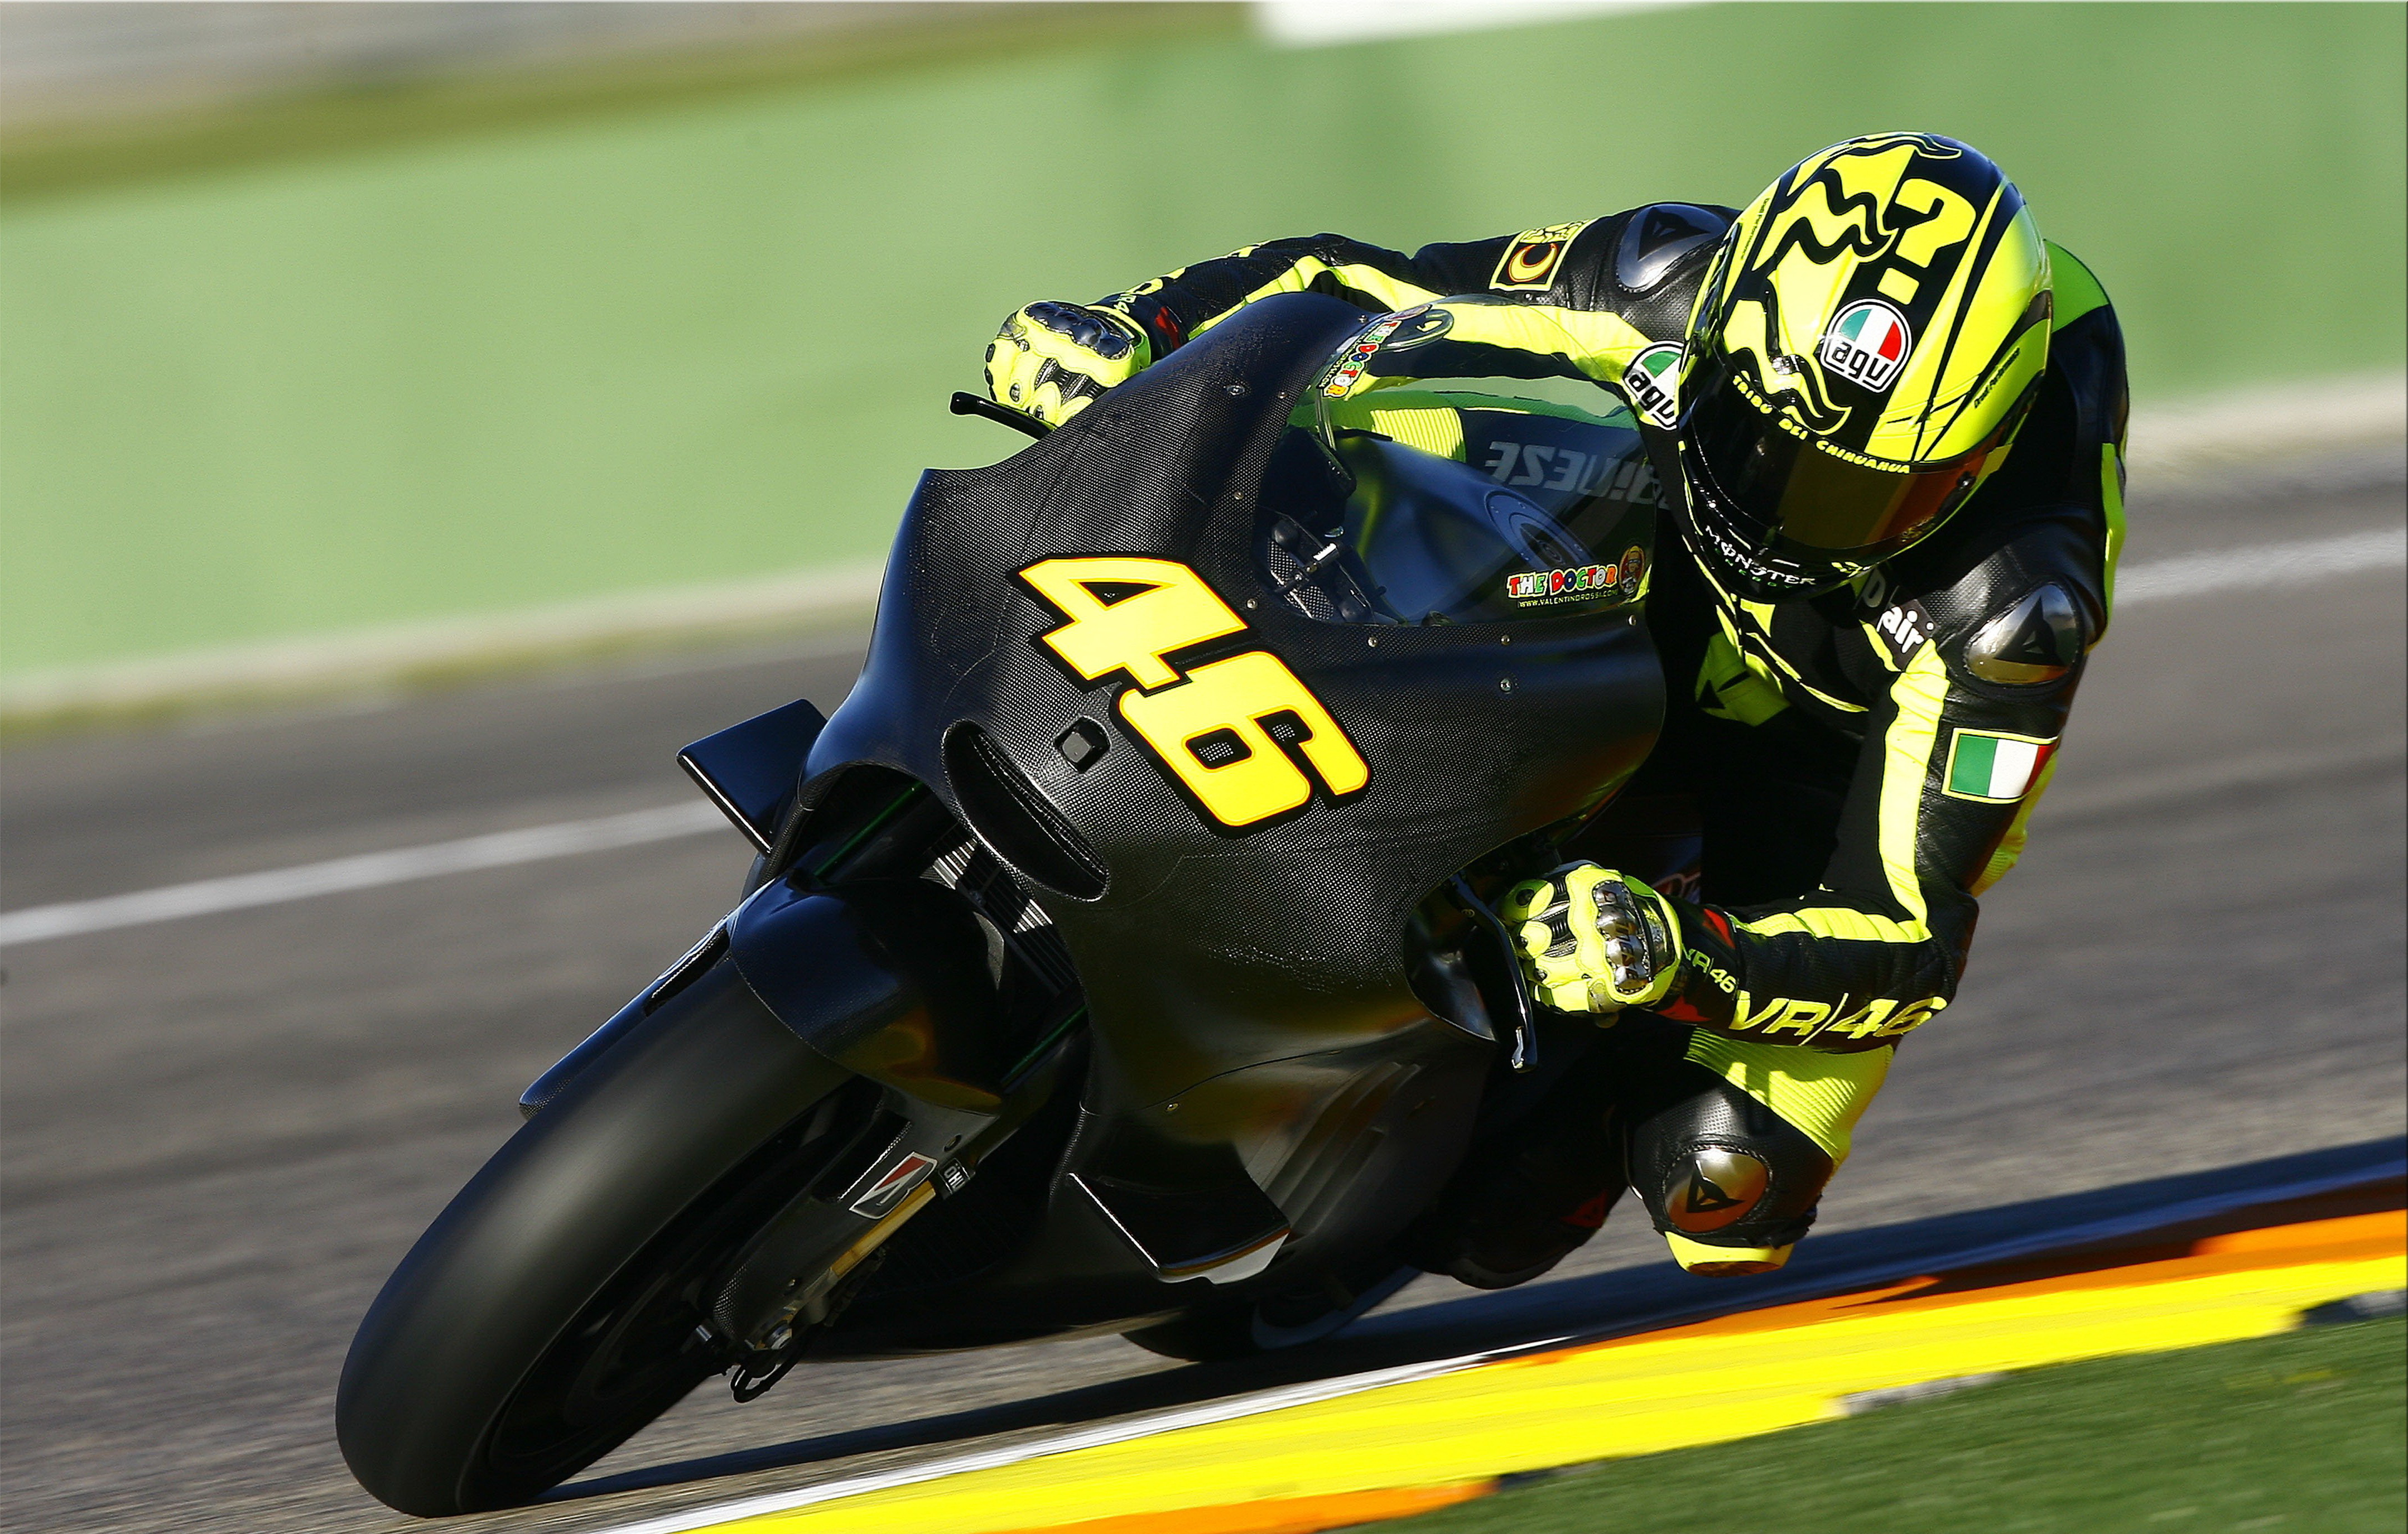 Motorcycle Racing 4k Ultra HD Wallpaper and Background Image